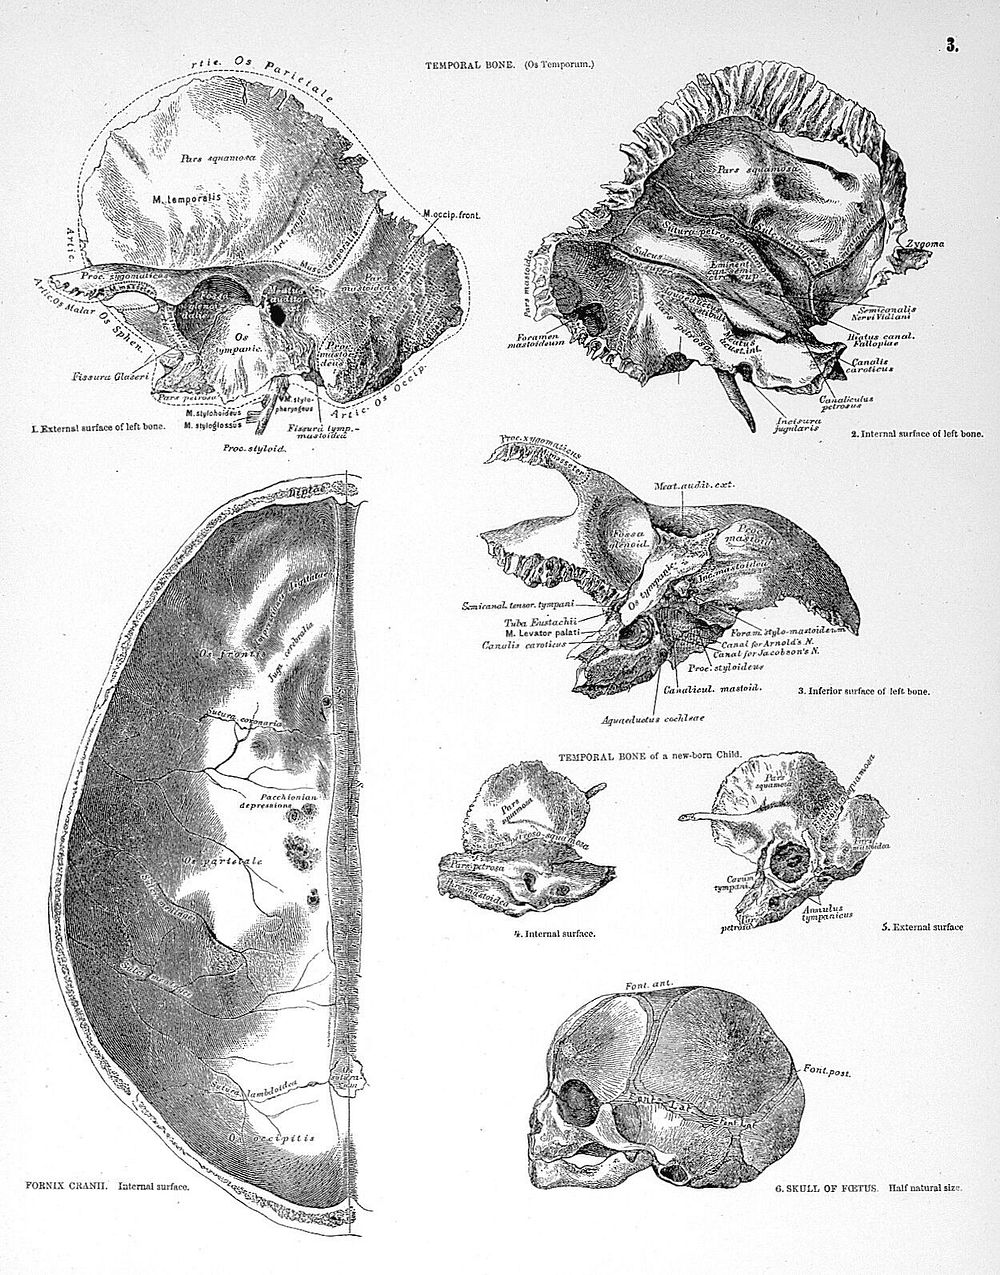 The descriptive atlas of anatomy : a representation of the anatomy of the human body / by Noble Smith.